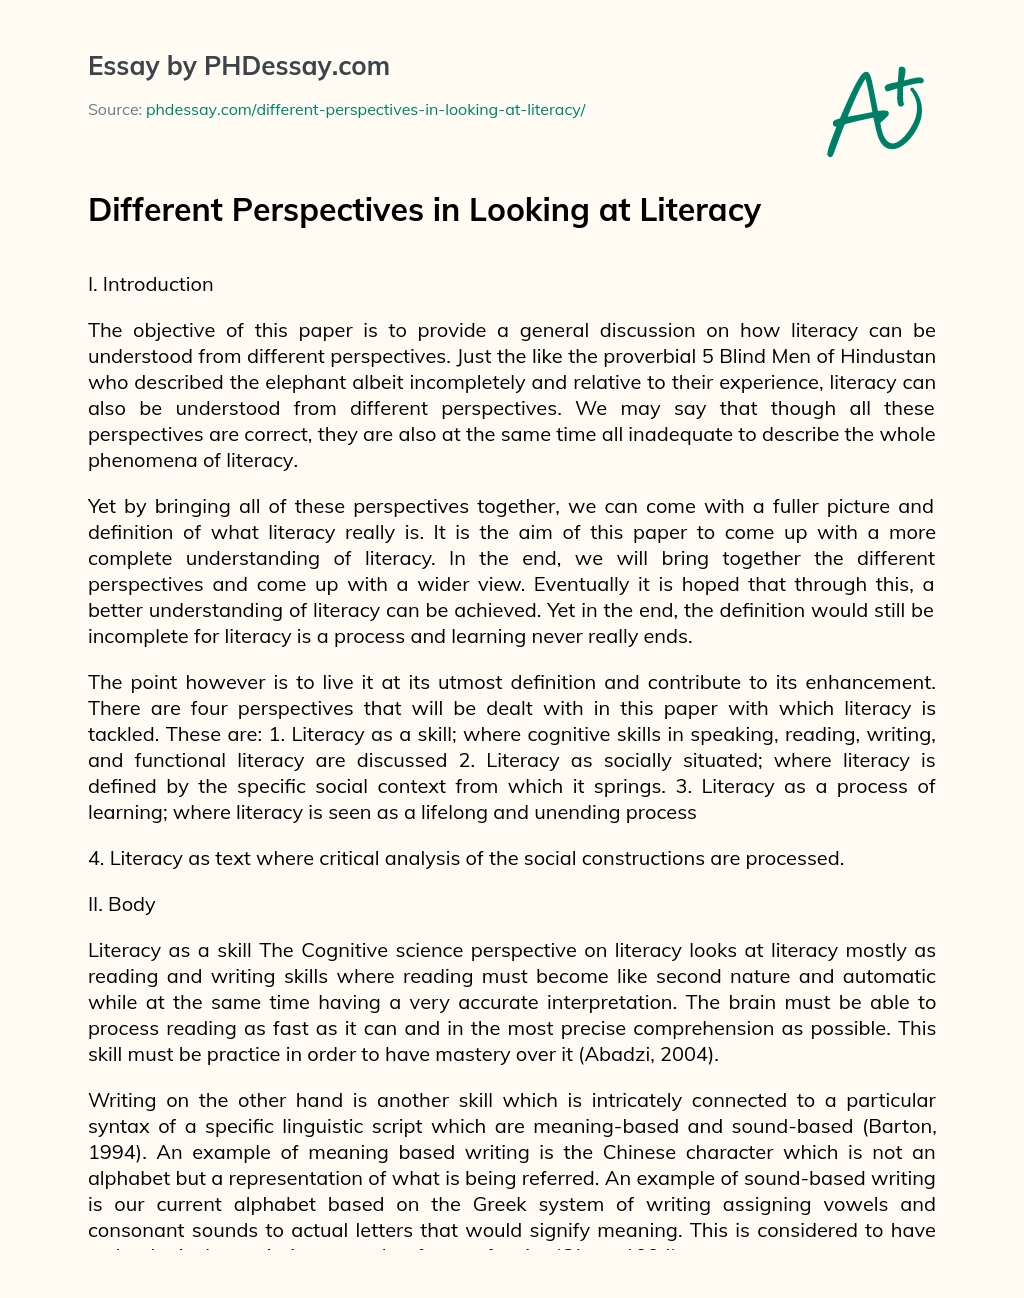 Different Perspectives in Looking at Literacy essay